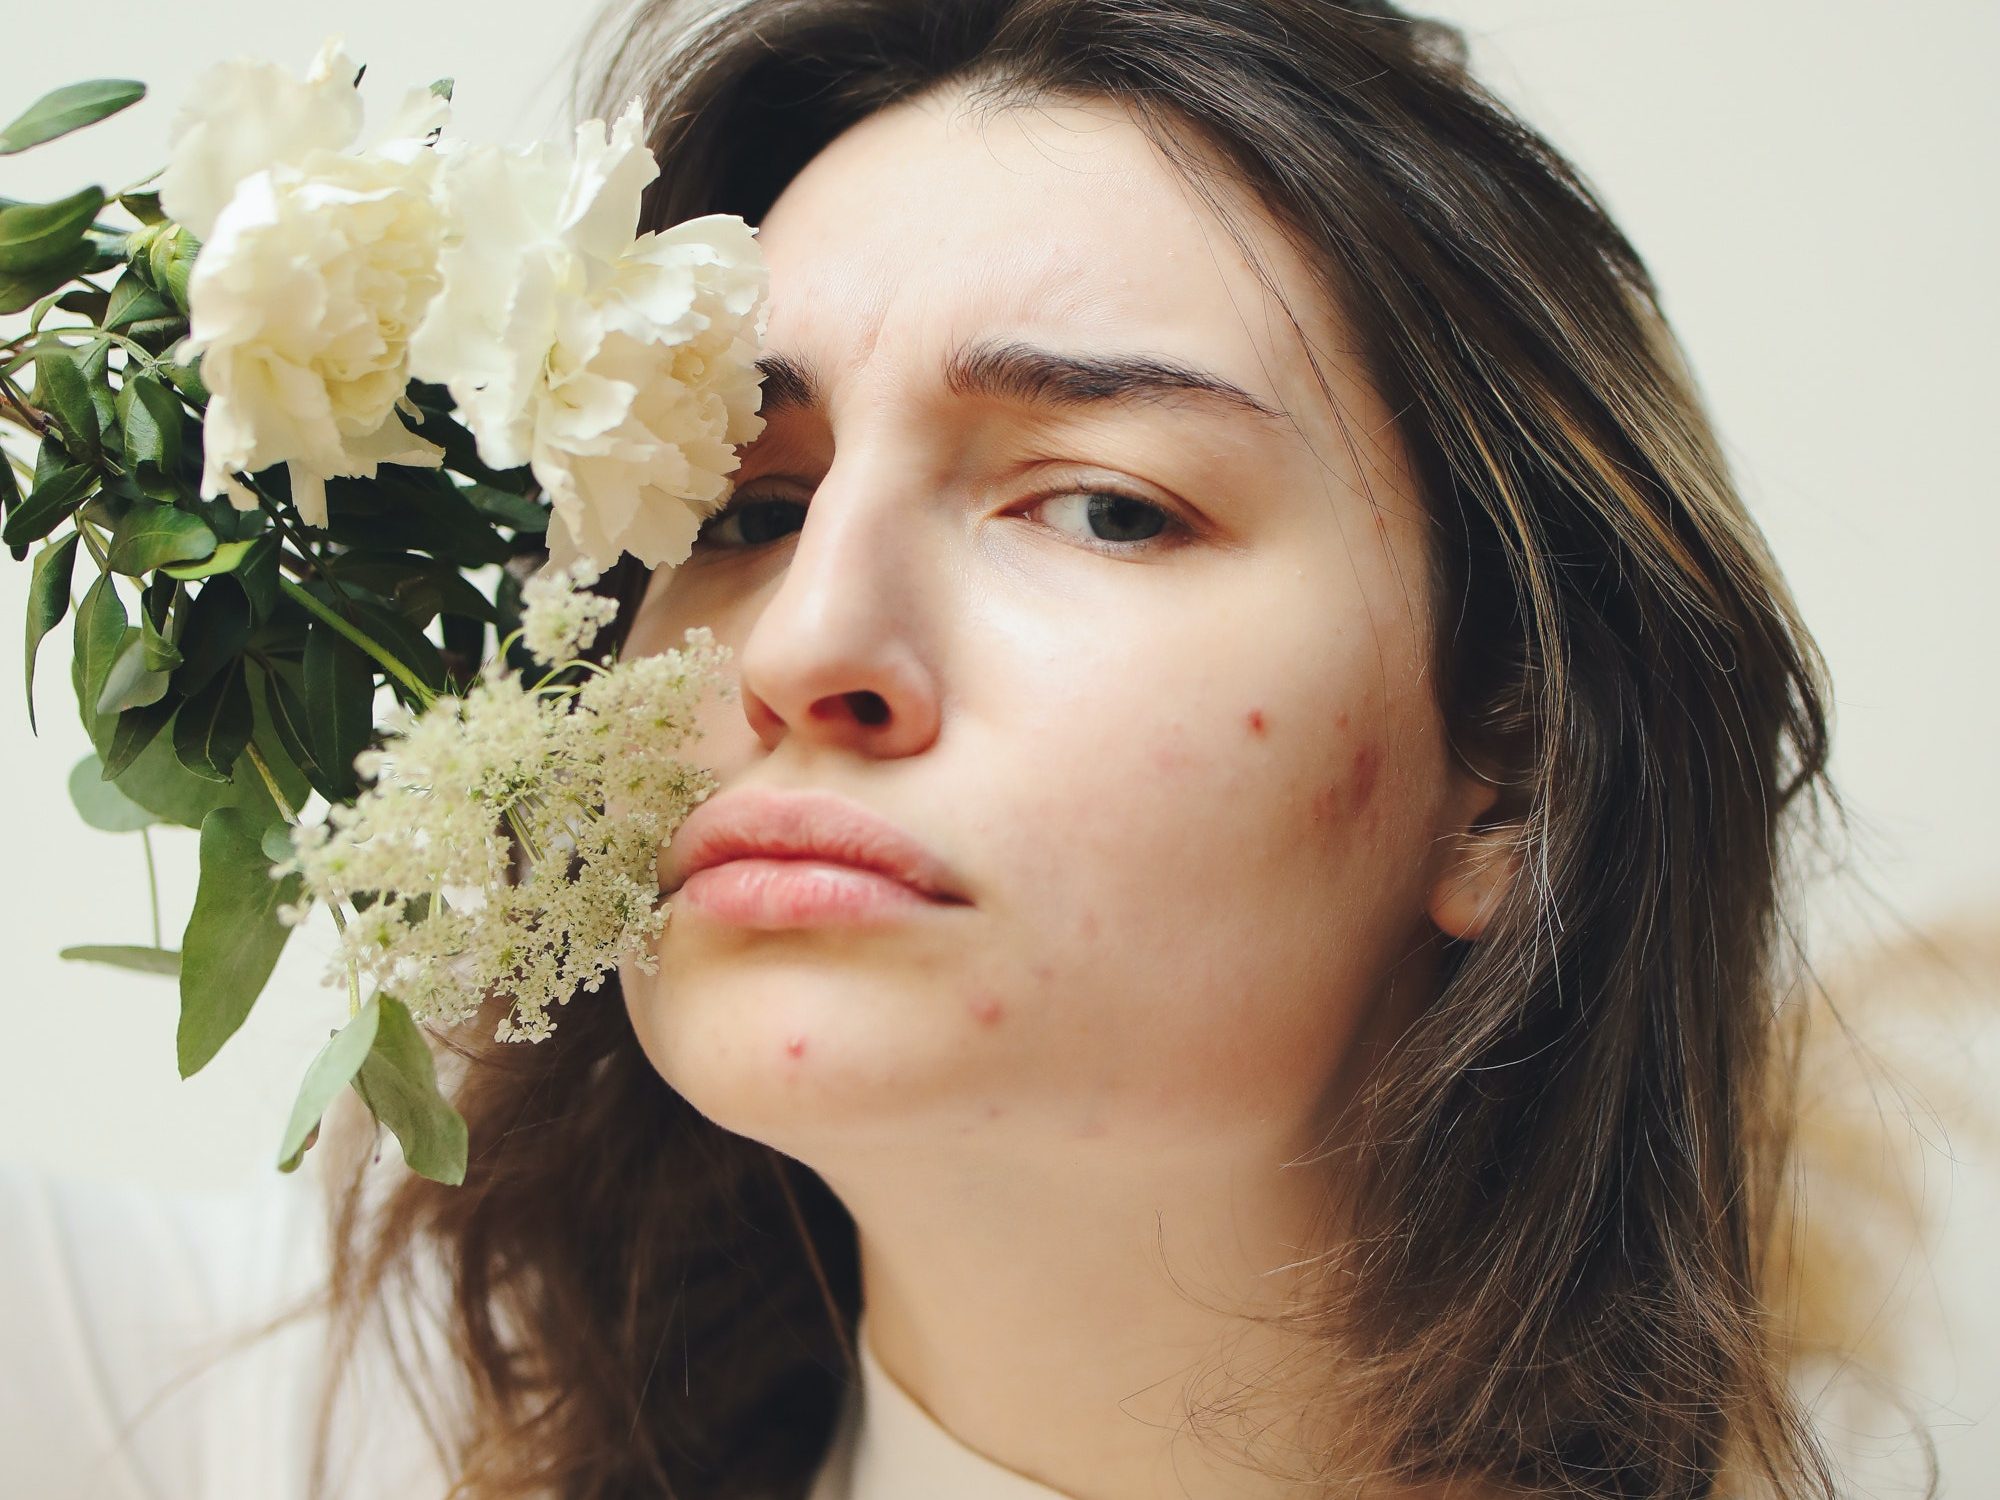 5 Common Causes For Face Acne That Everyone Should Know, From Pillow To Nutrition